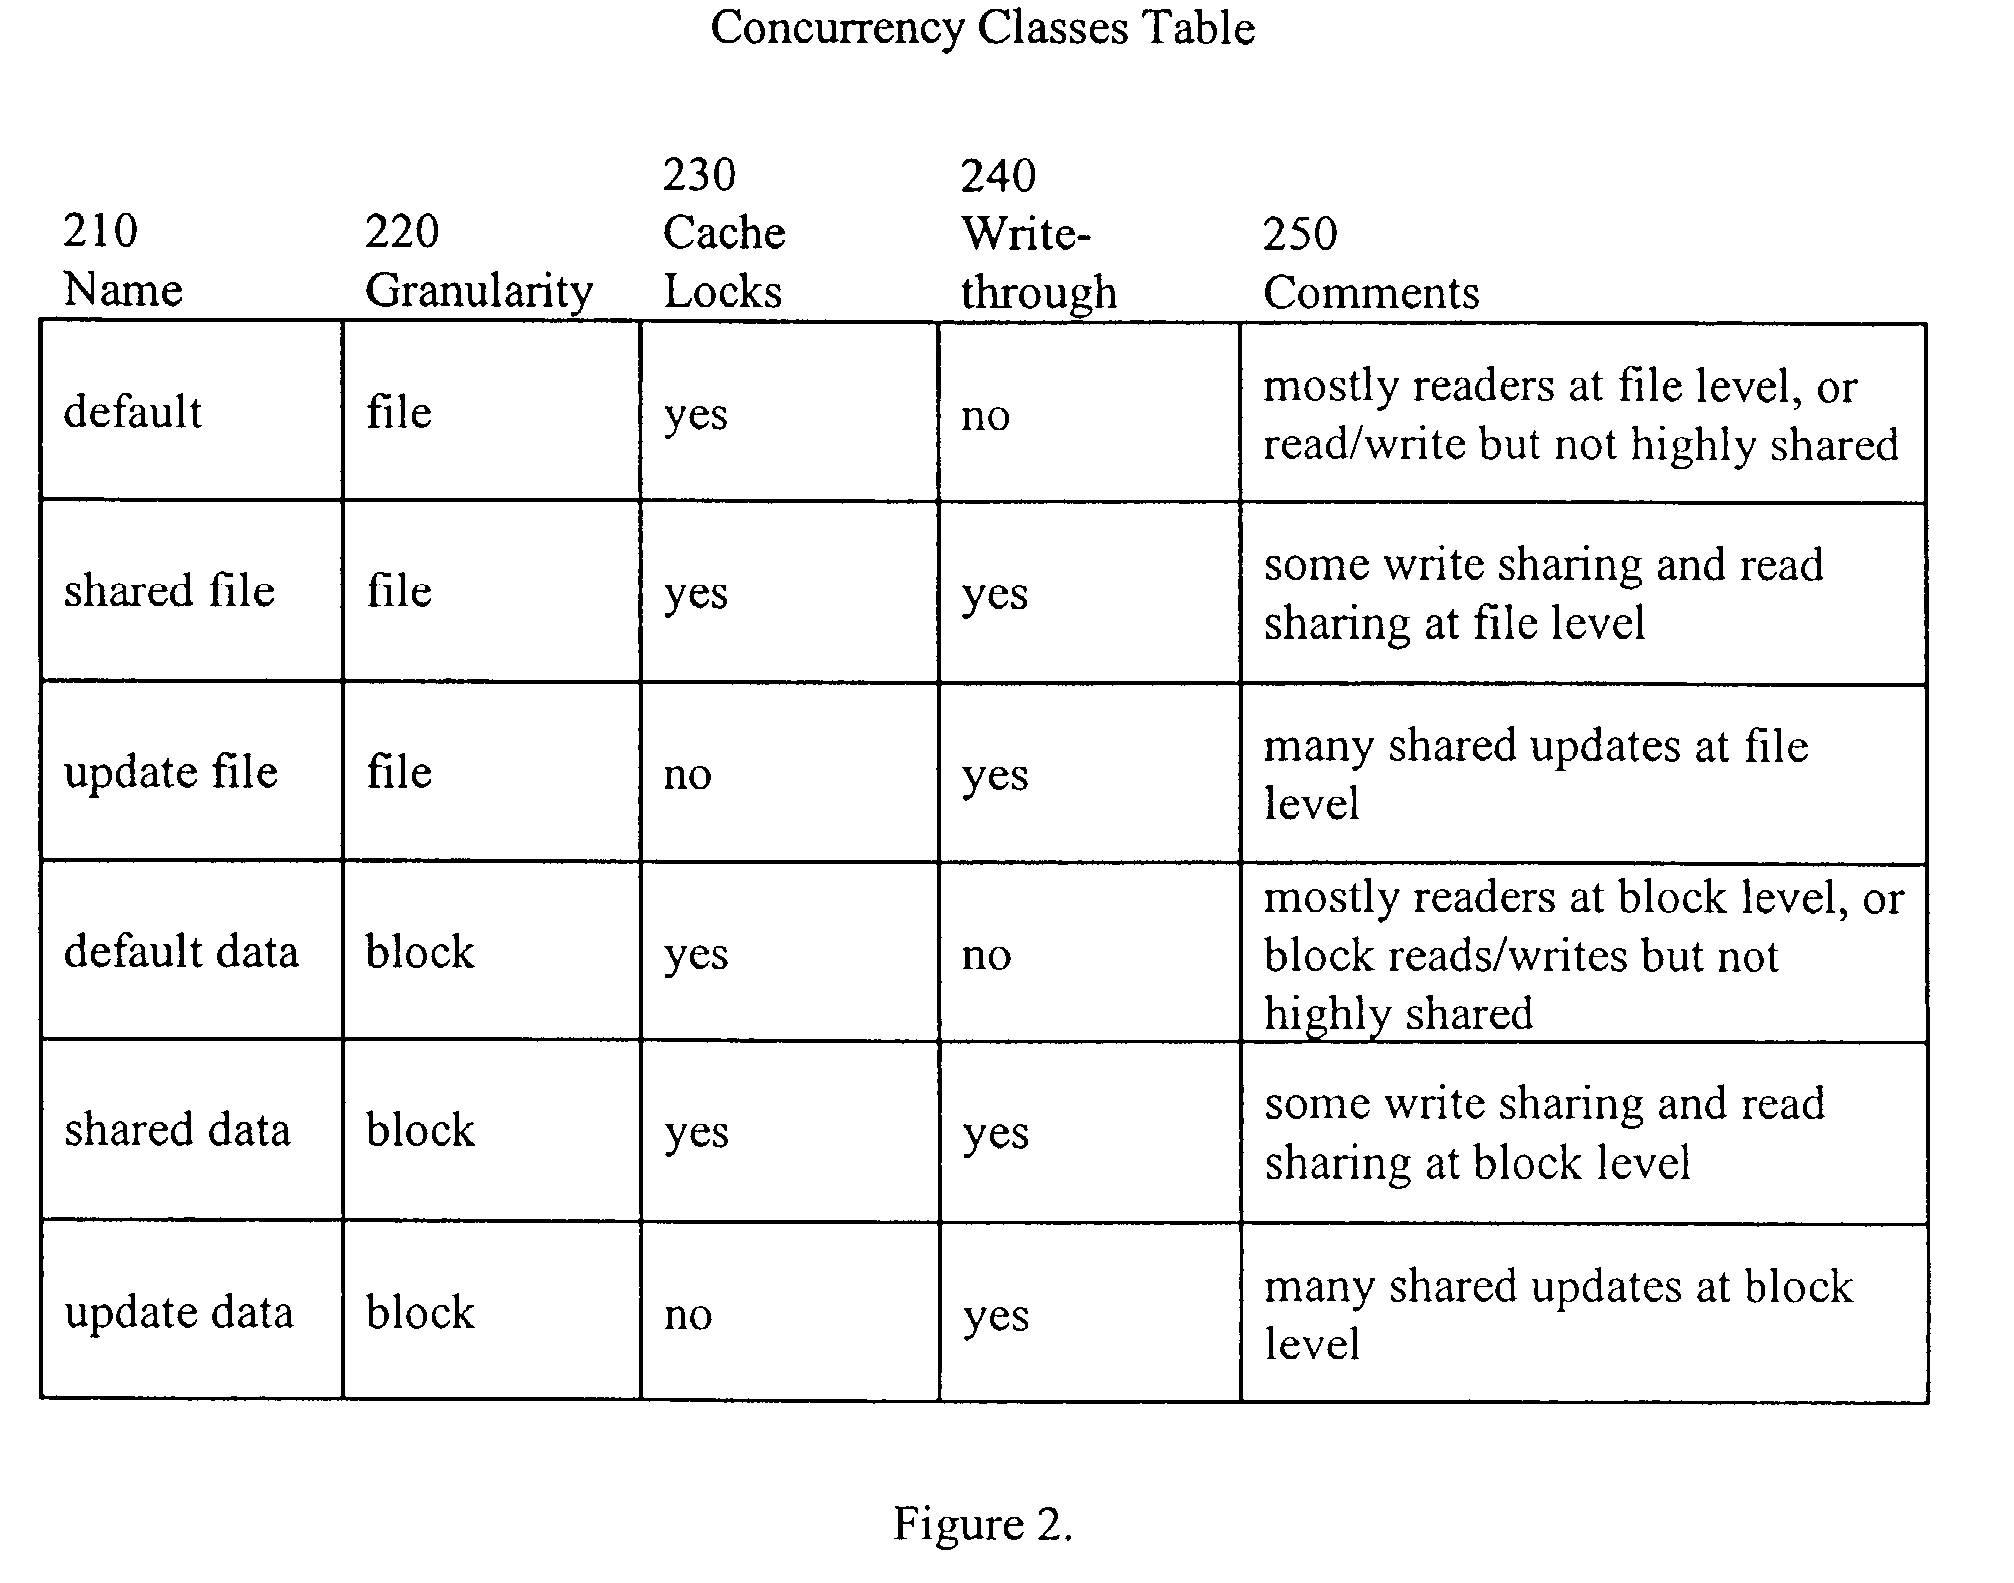 Concurrency classes for shared file systems